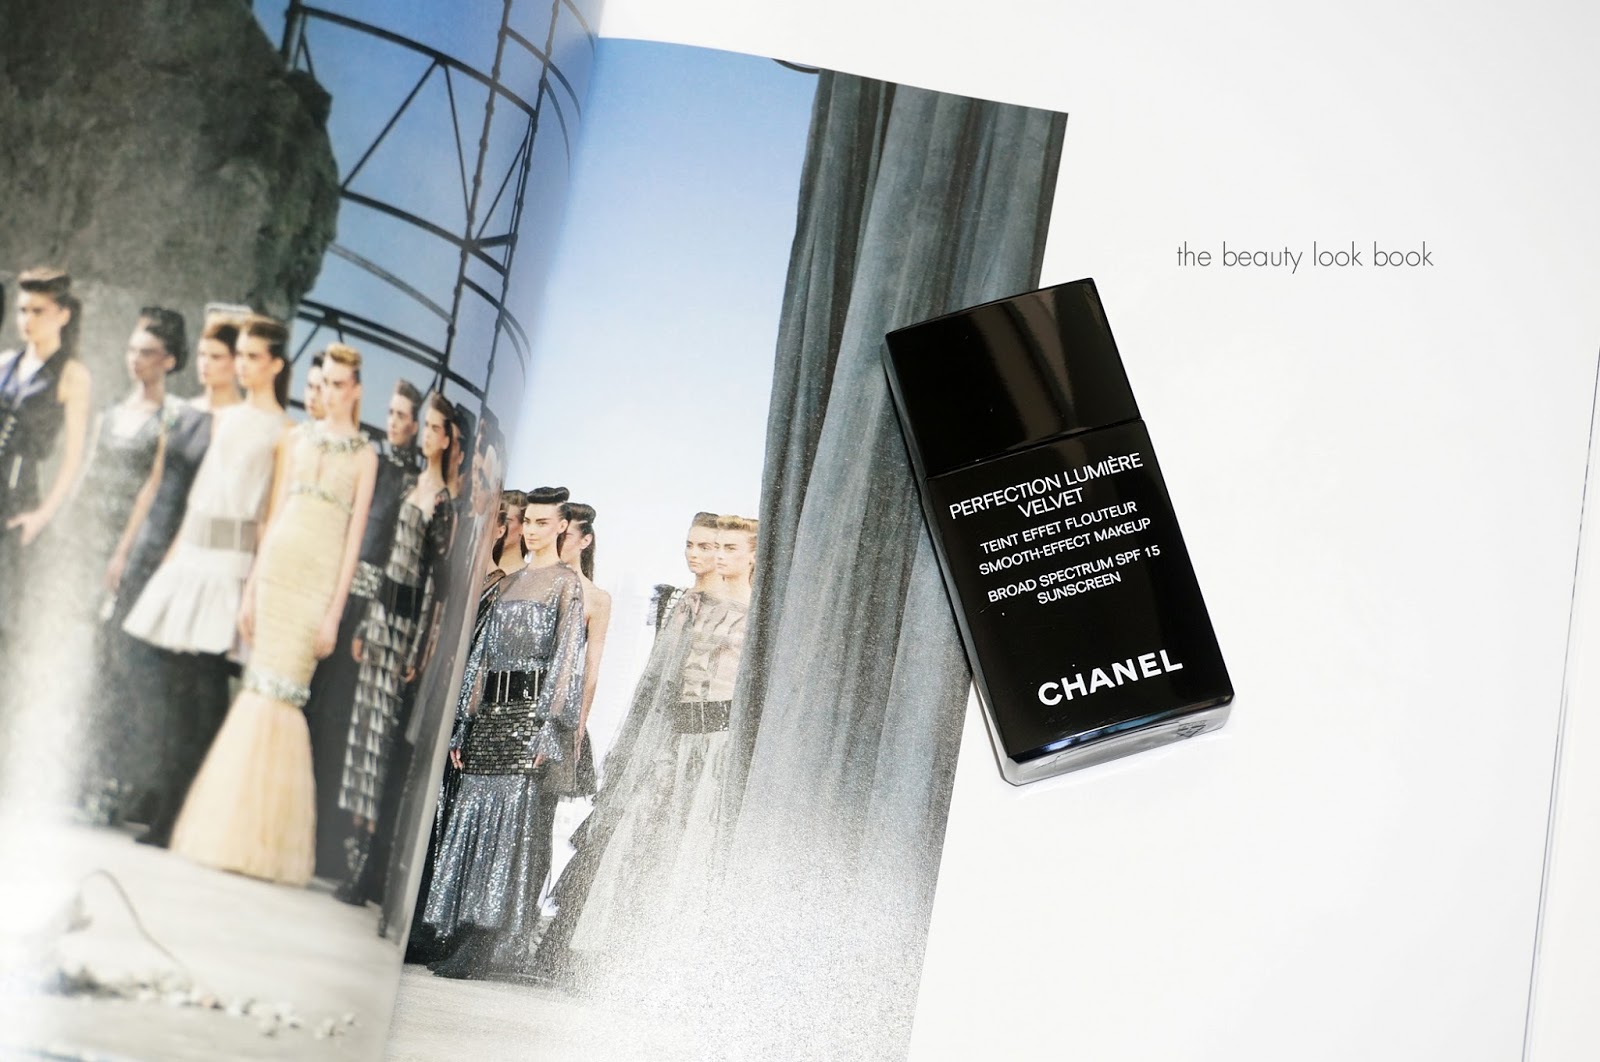 chanel locations near me